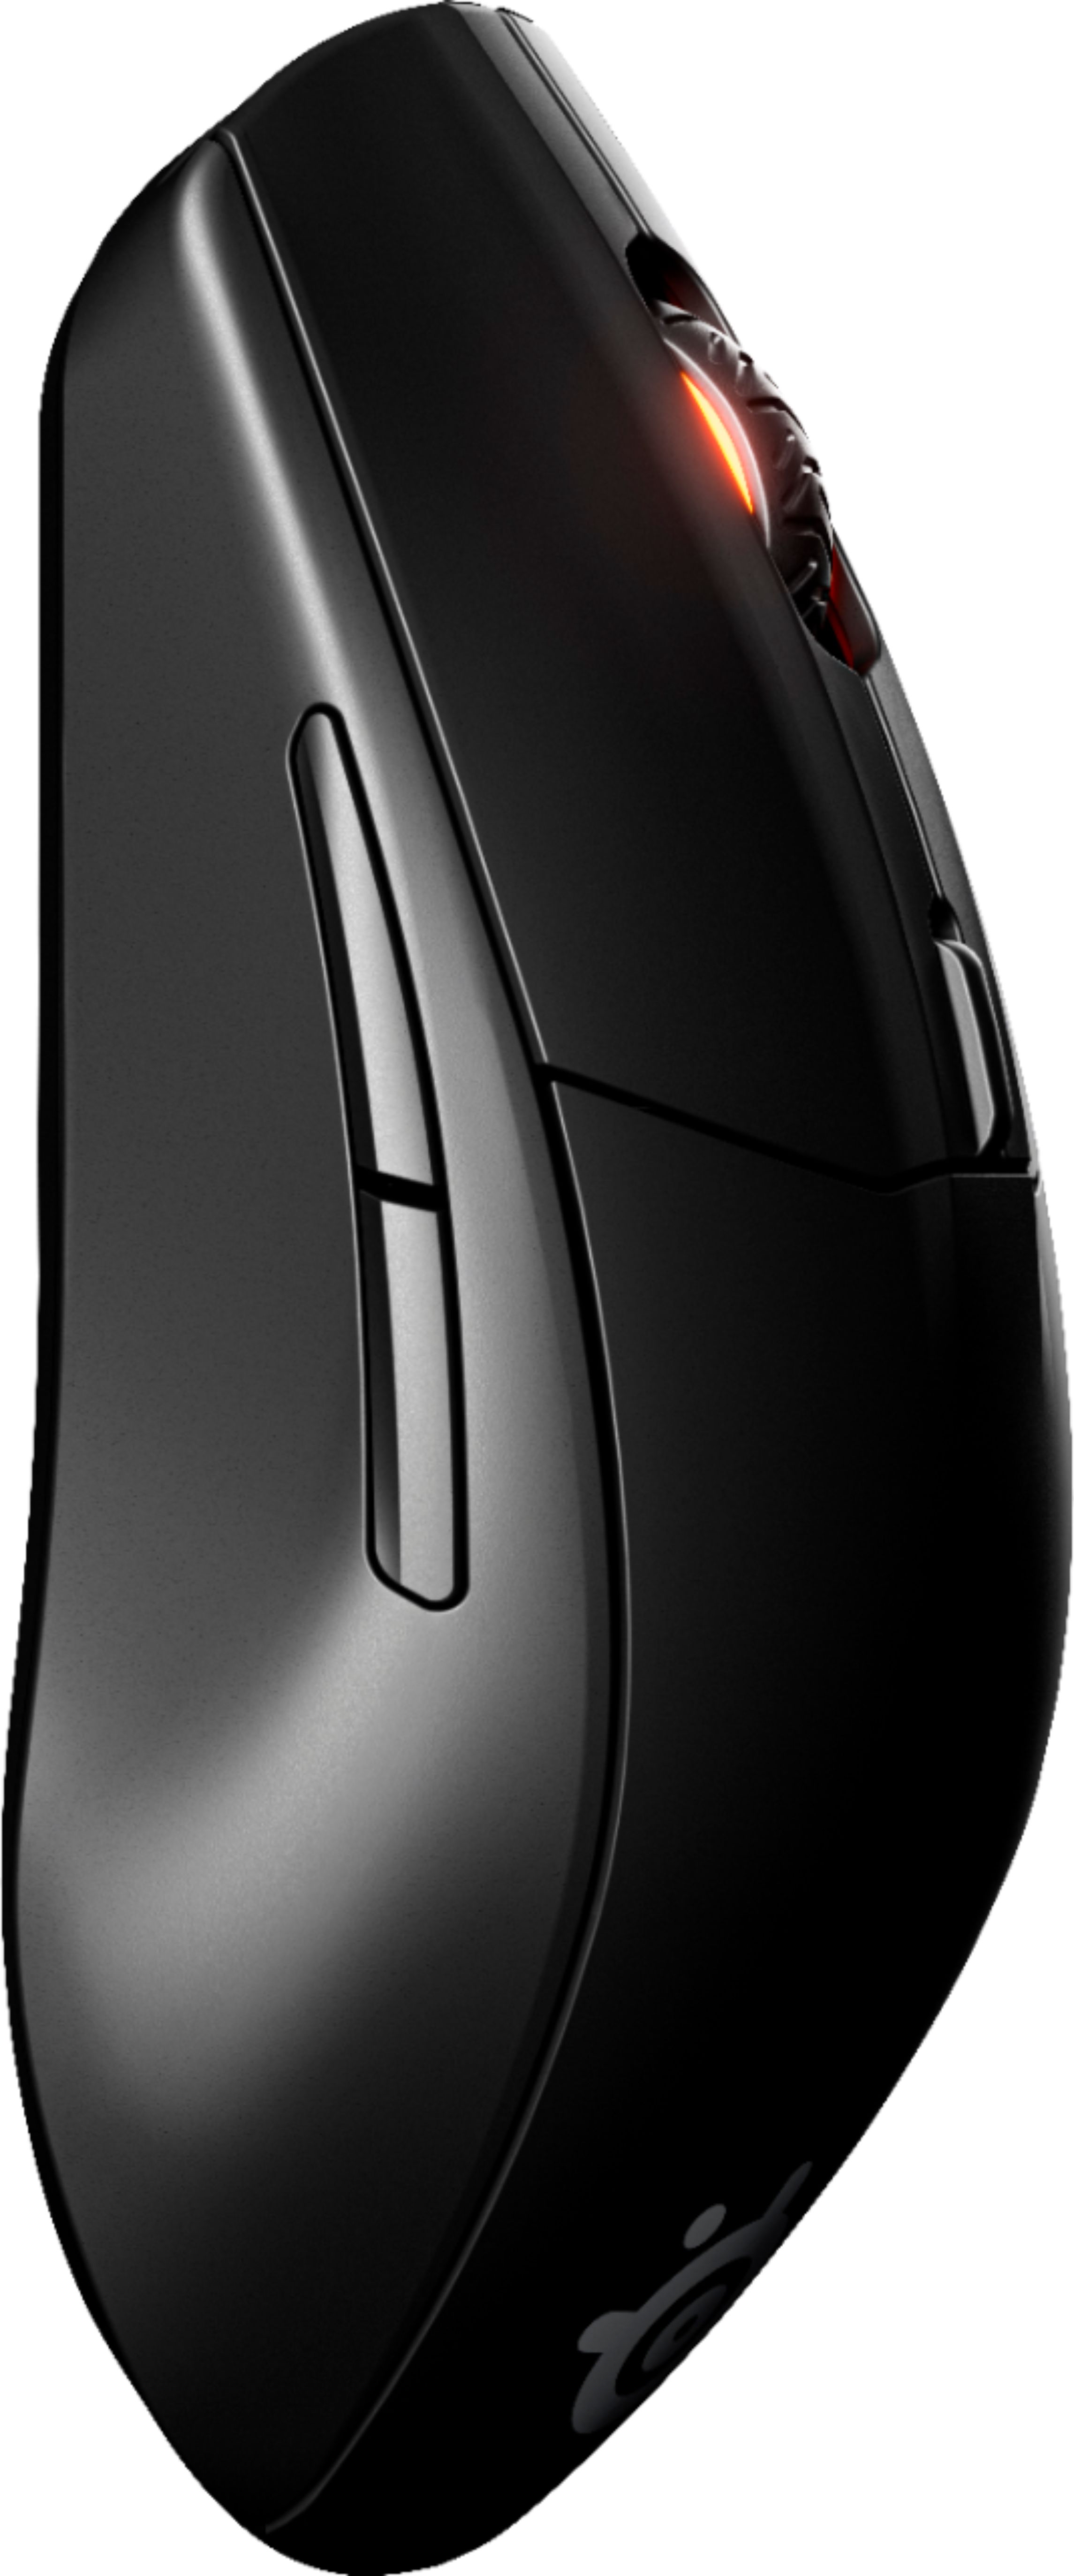 with Wireless 3 62521 Mouse - Gaming SteelSeries Optical Prism Lightweight Black Rival RGB Lighting Best Brilliant Buy